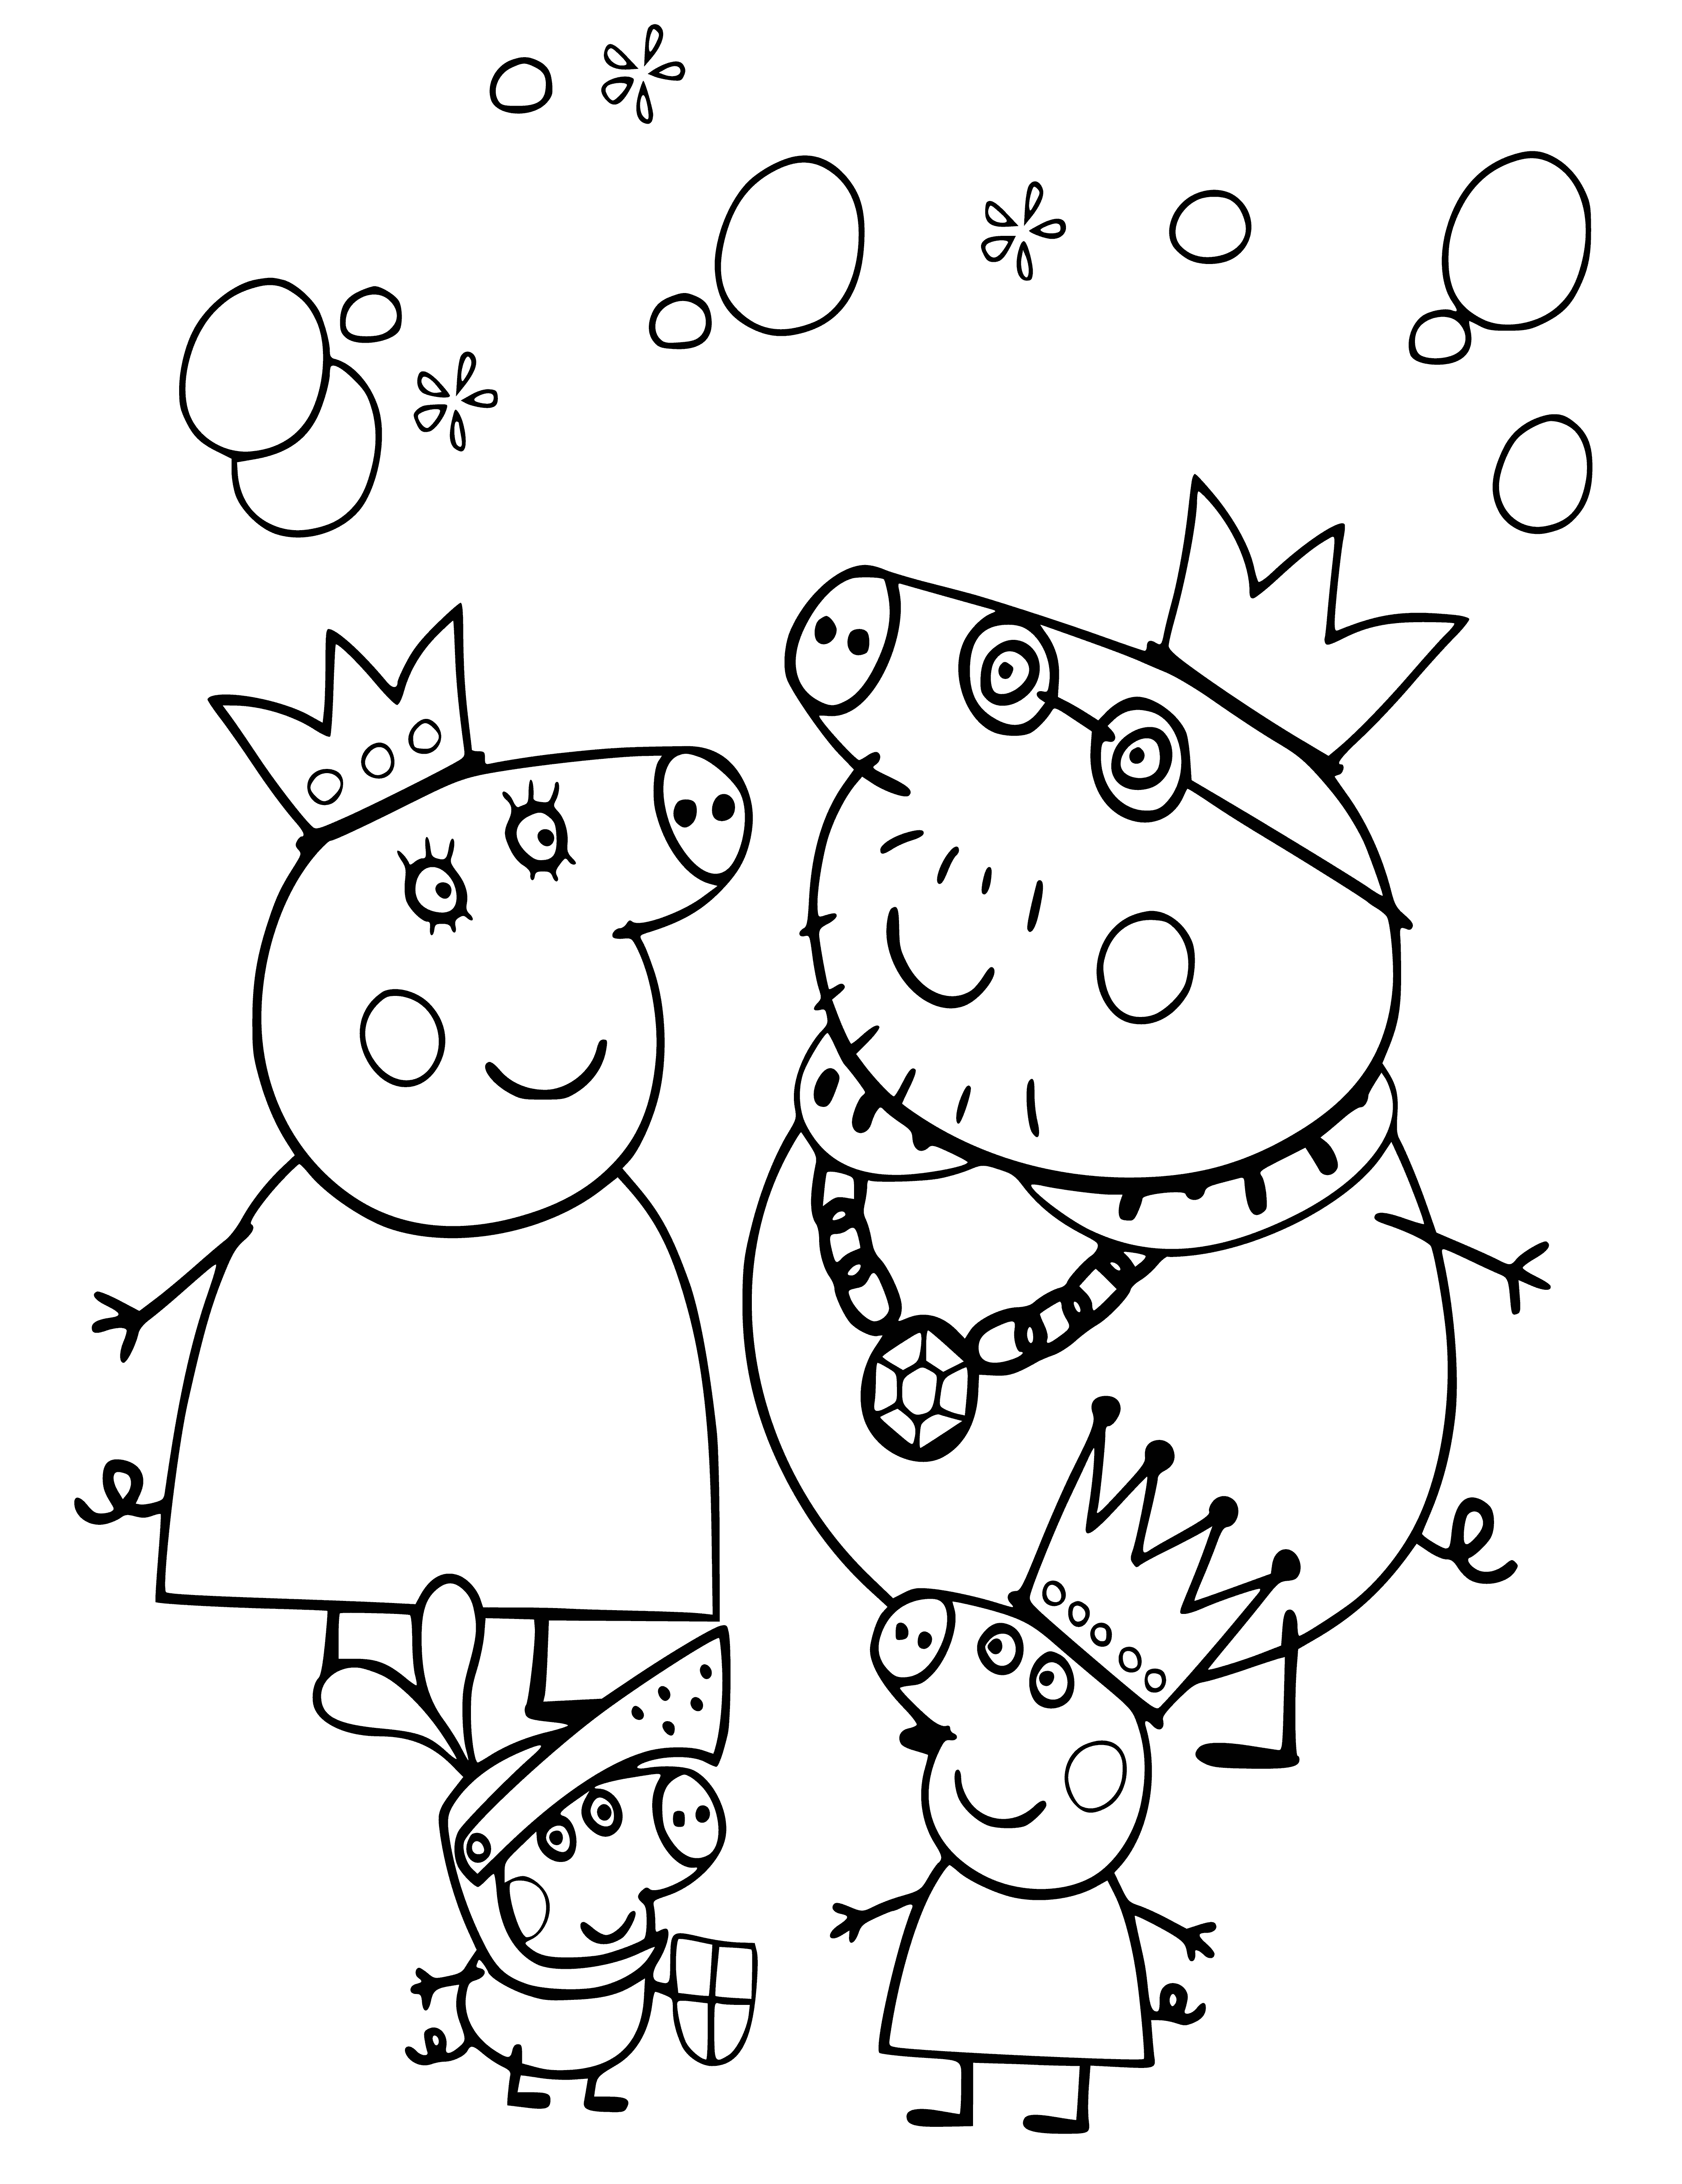 coloring page: Peppa and her family dress up and pose on a red carpet, with Peppa in a blue dress and crown, George in a red cape and crown, and the parents in a blue suit and pink dress. #peppapig